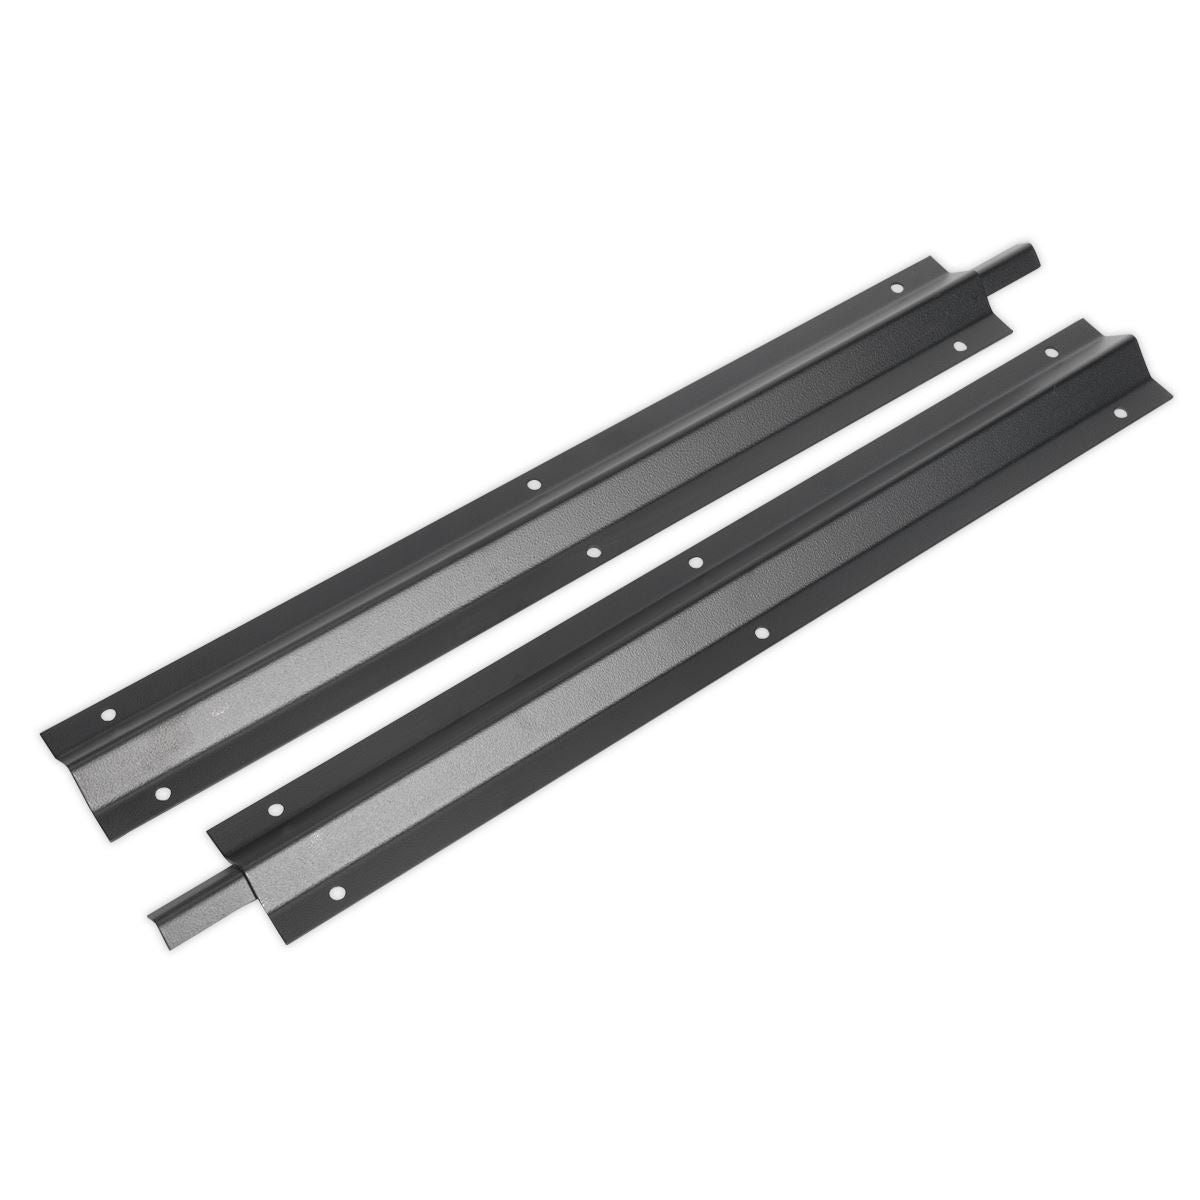 Sealey Extension Rail Set for HBS97 Series 700mm